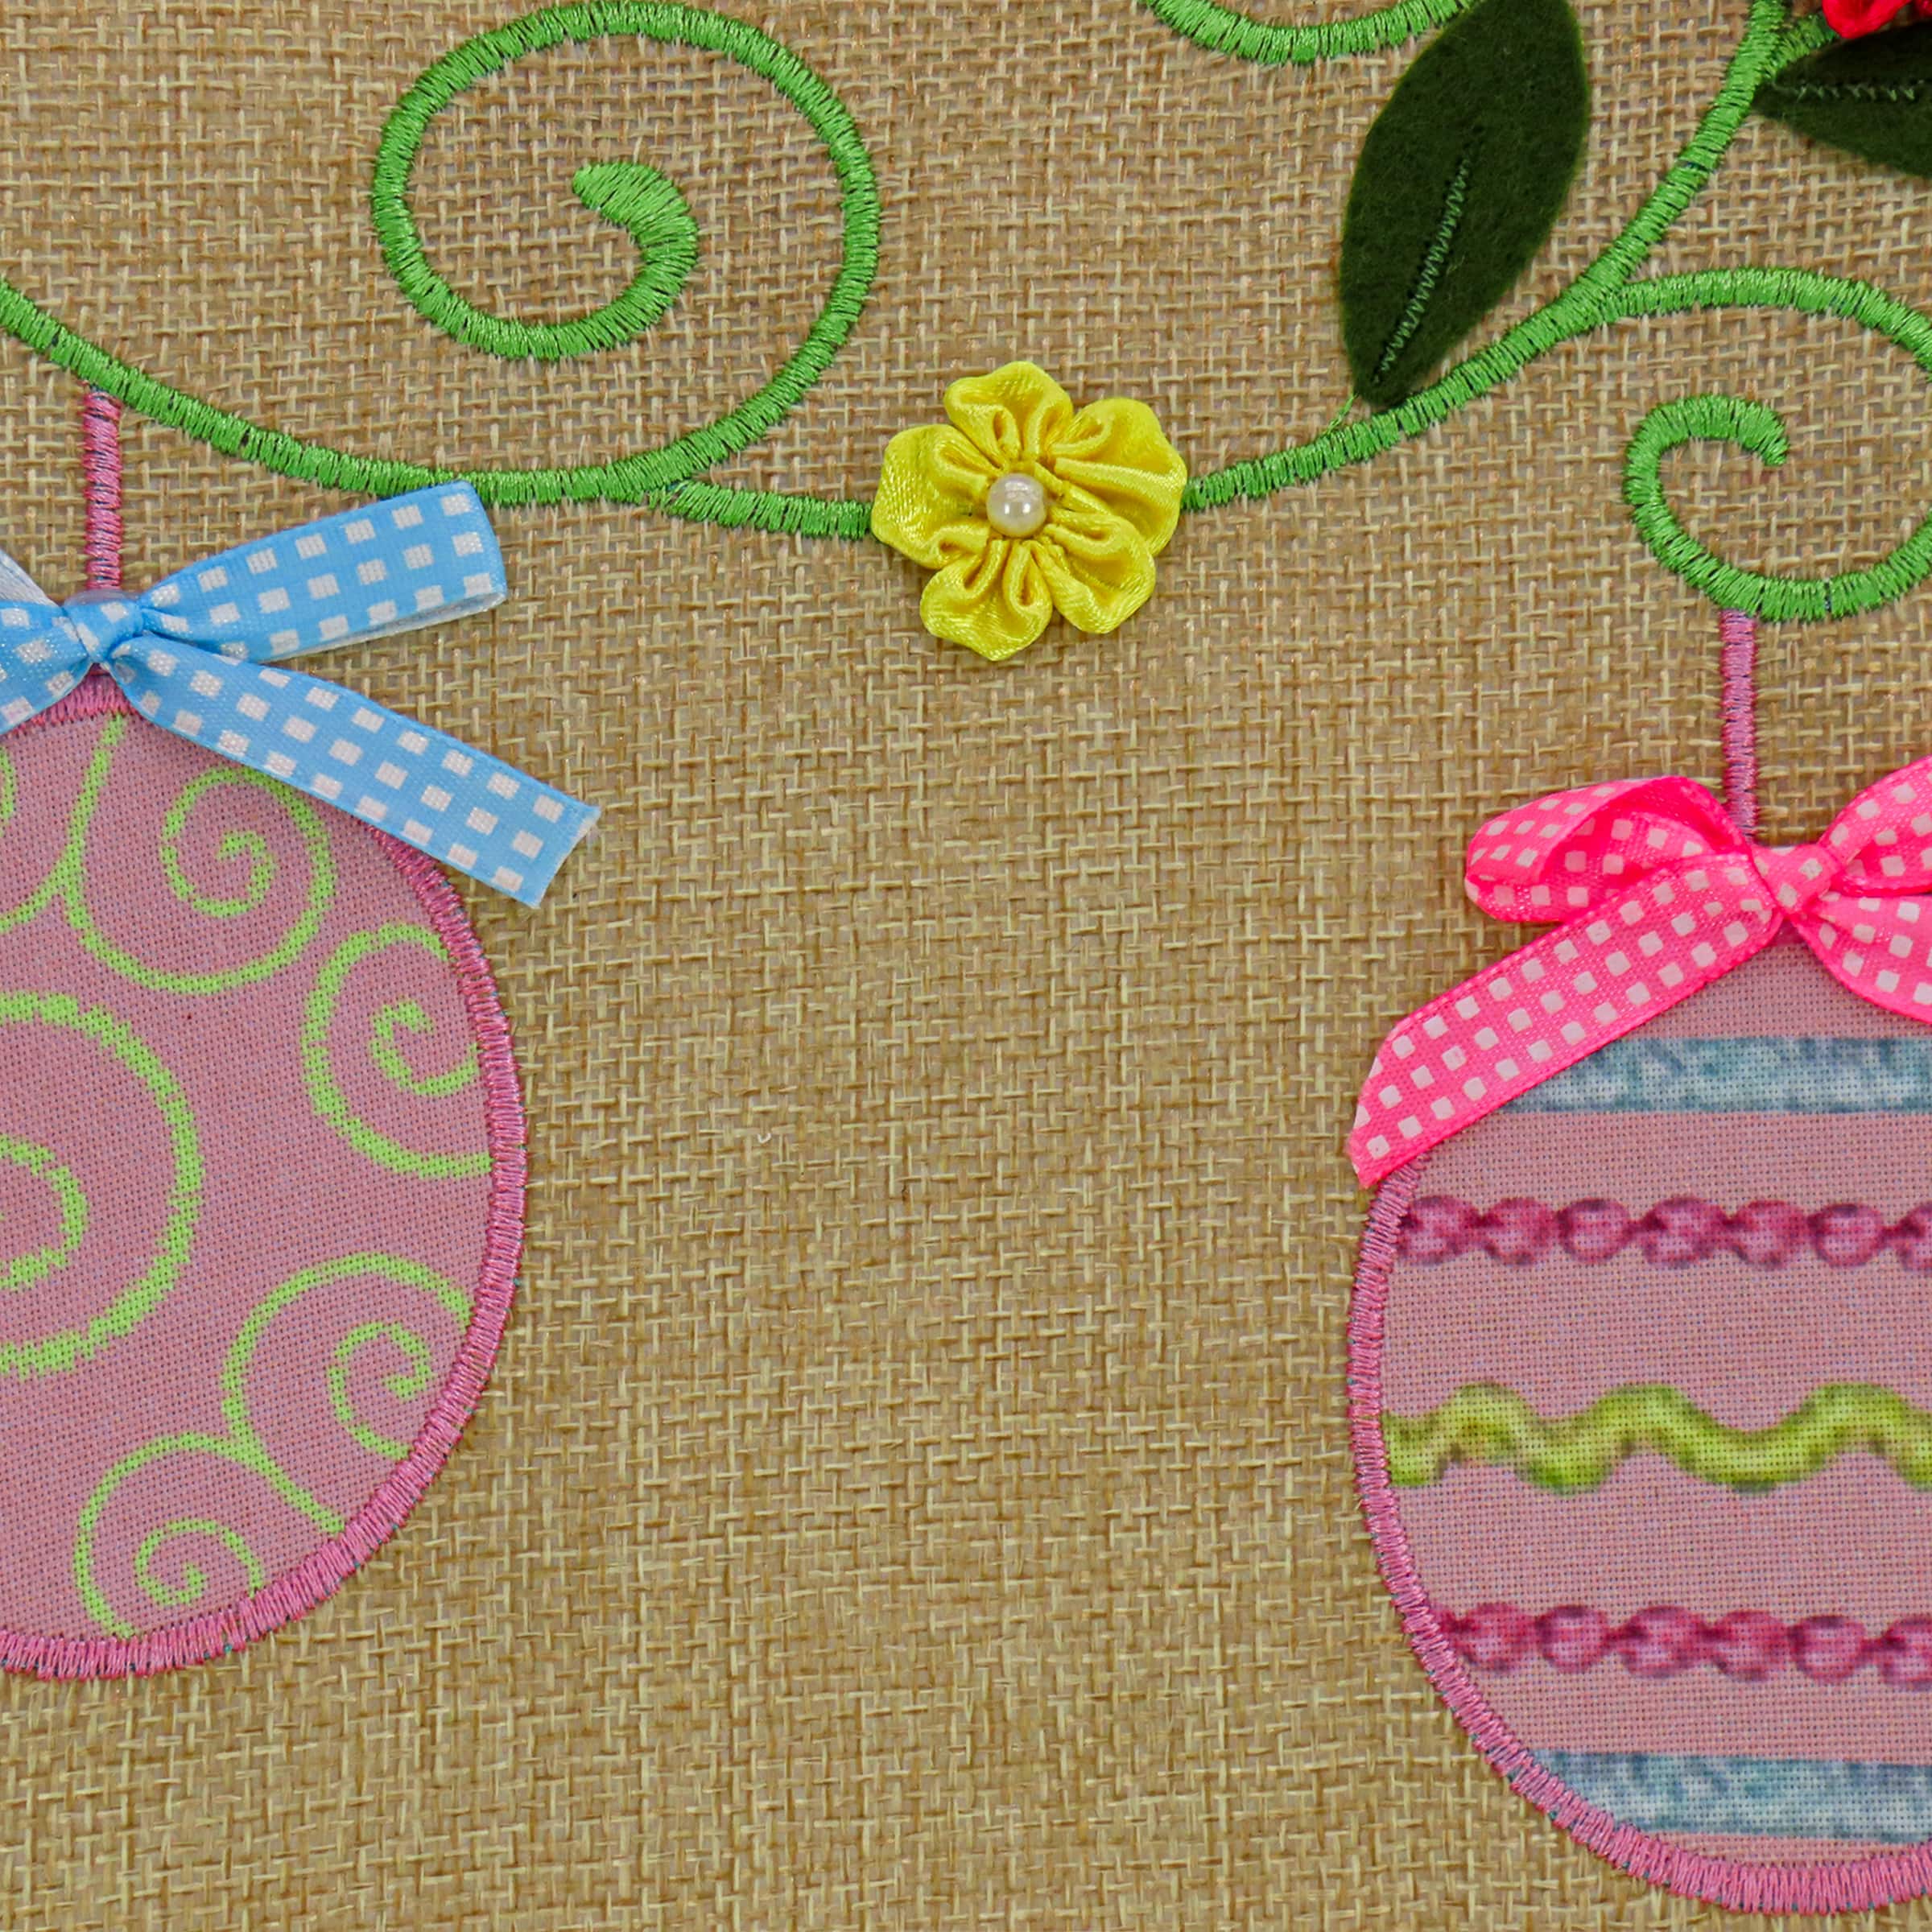 18&#x27;&#x27; x 10&#x27;&#x27; Decorated Eggs Easter Pillow